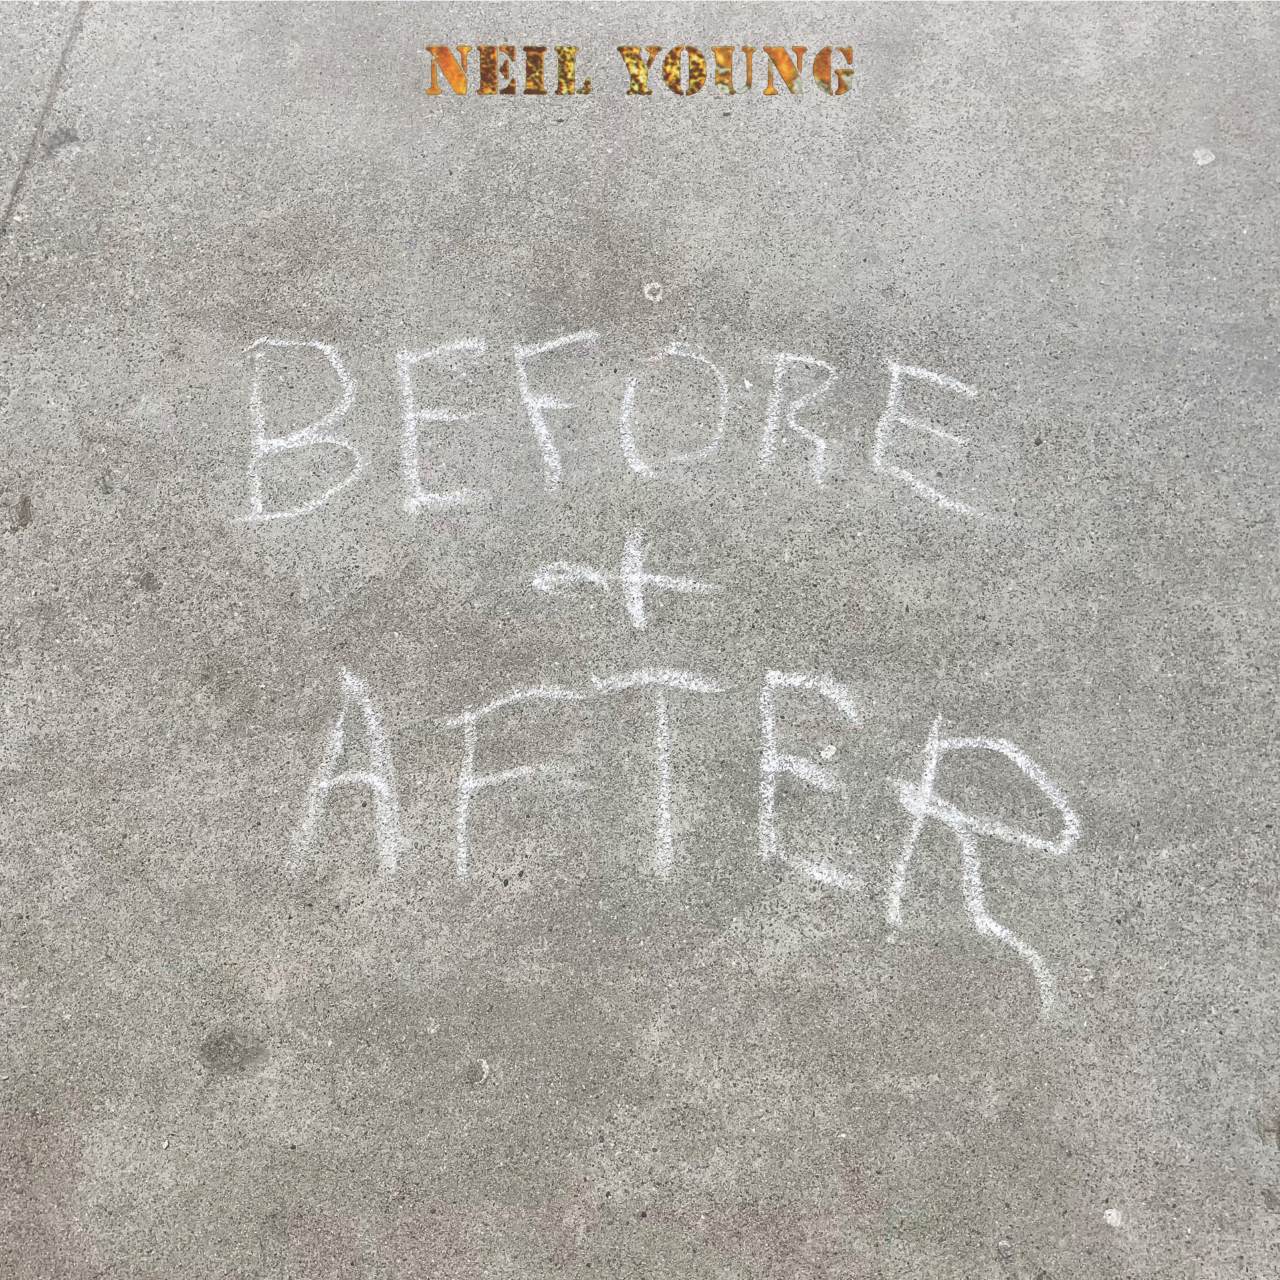 Neil Young - Before And After cover album